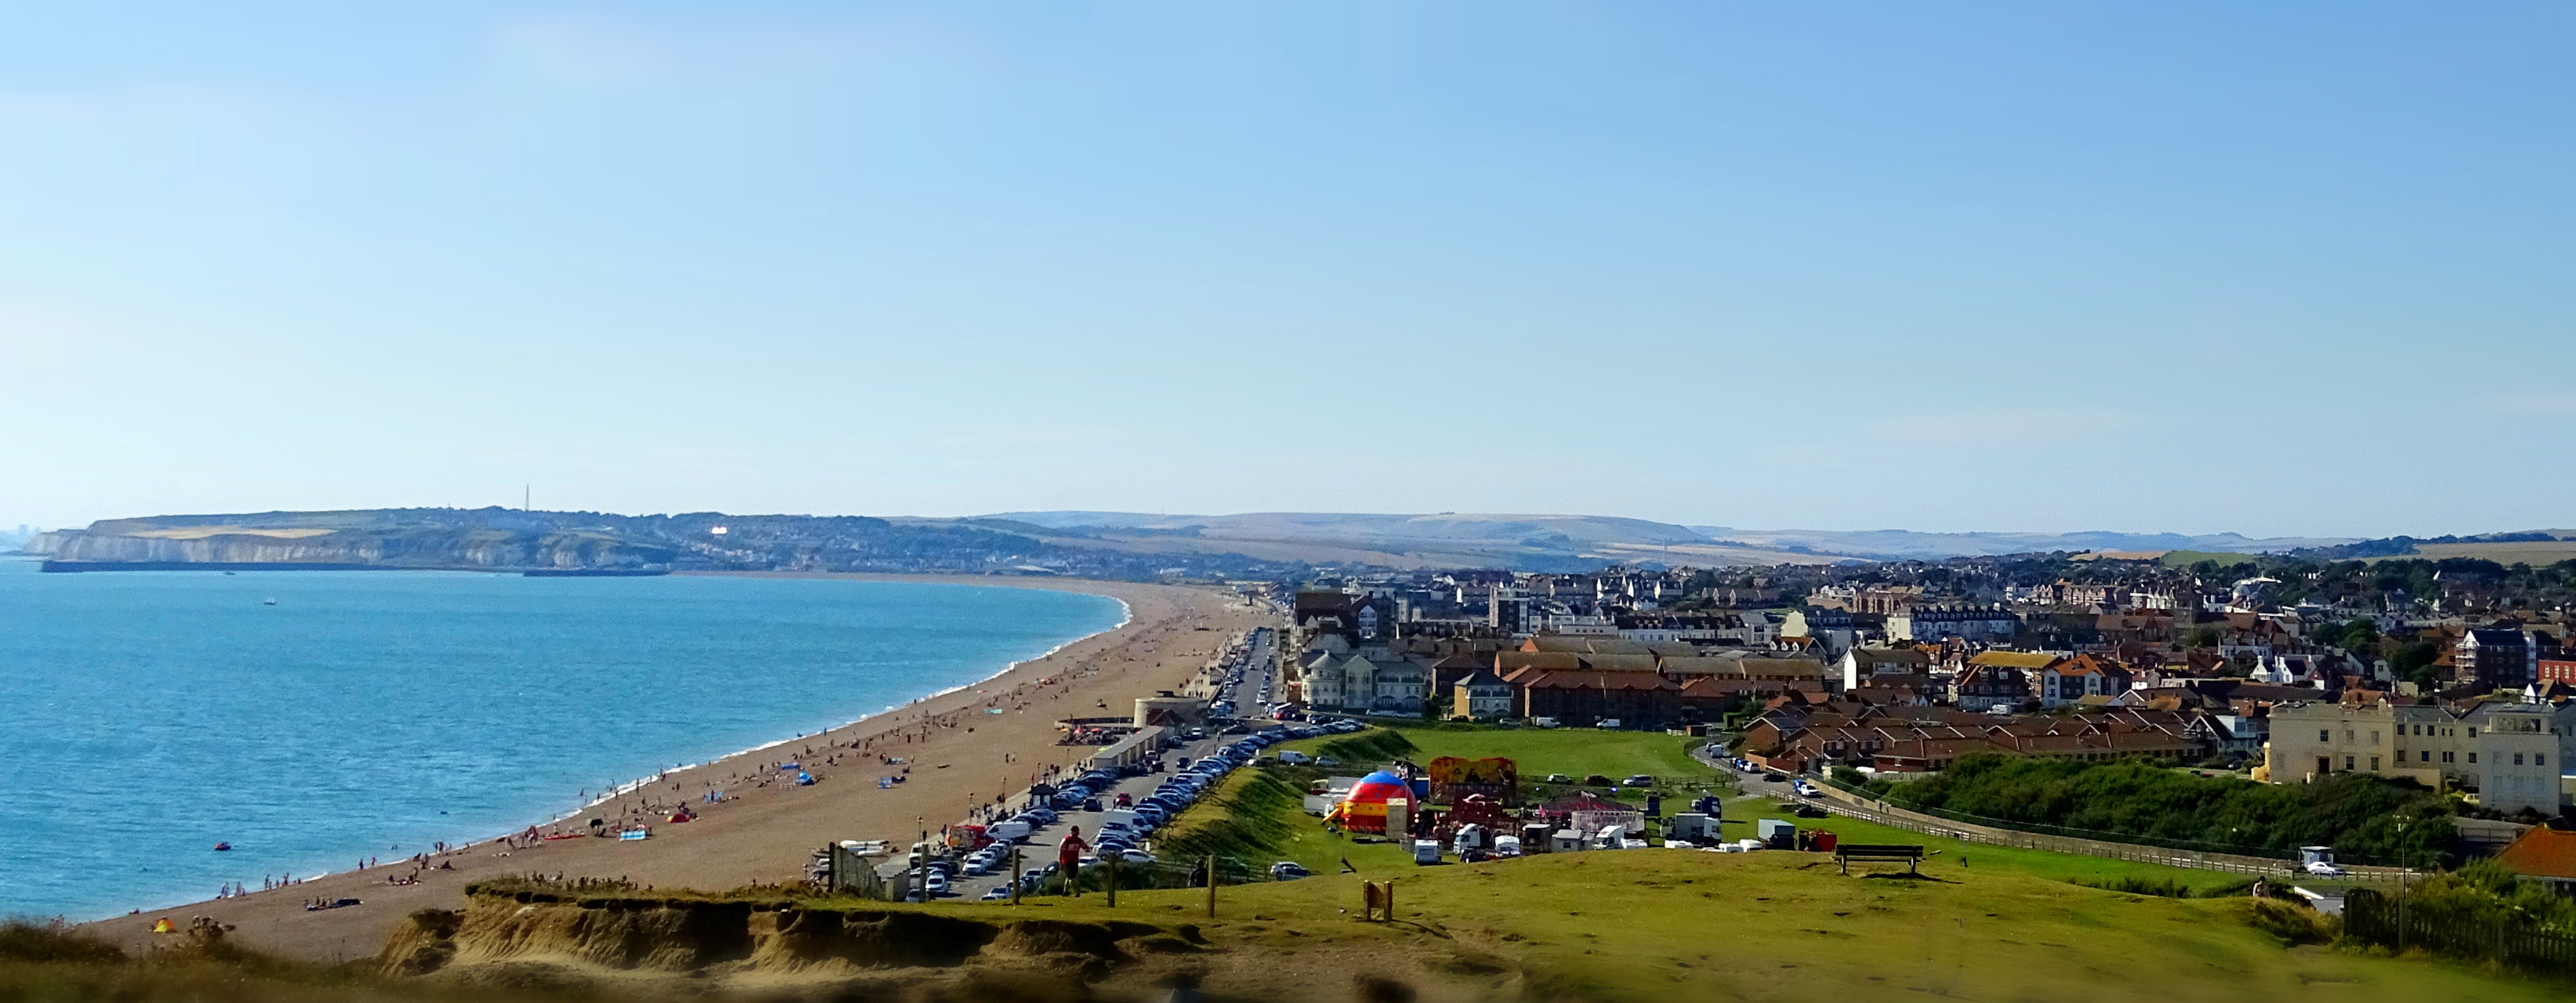 A photograph of Seaford Bay